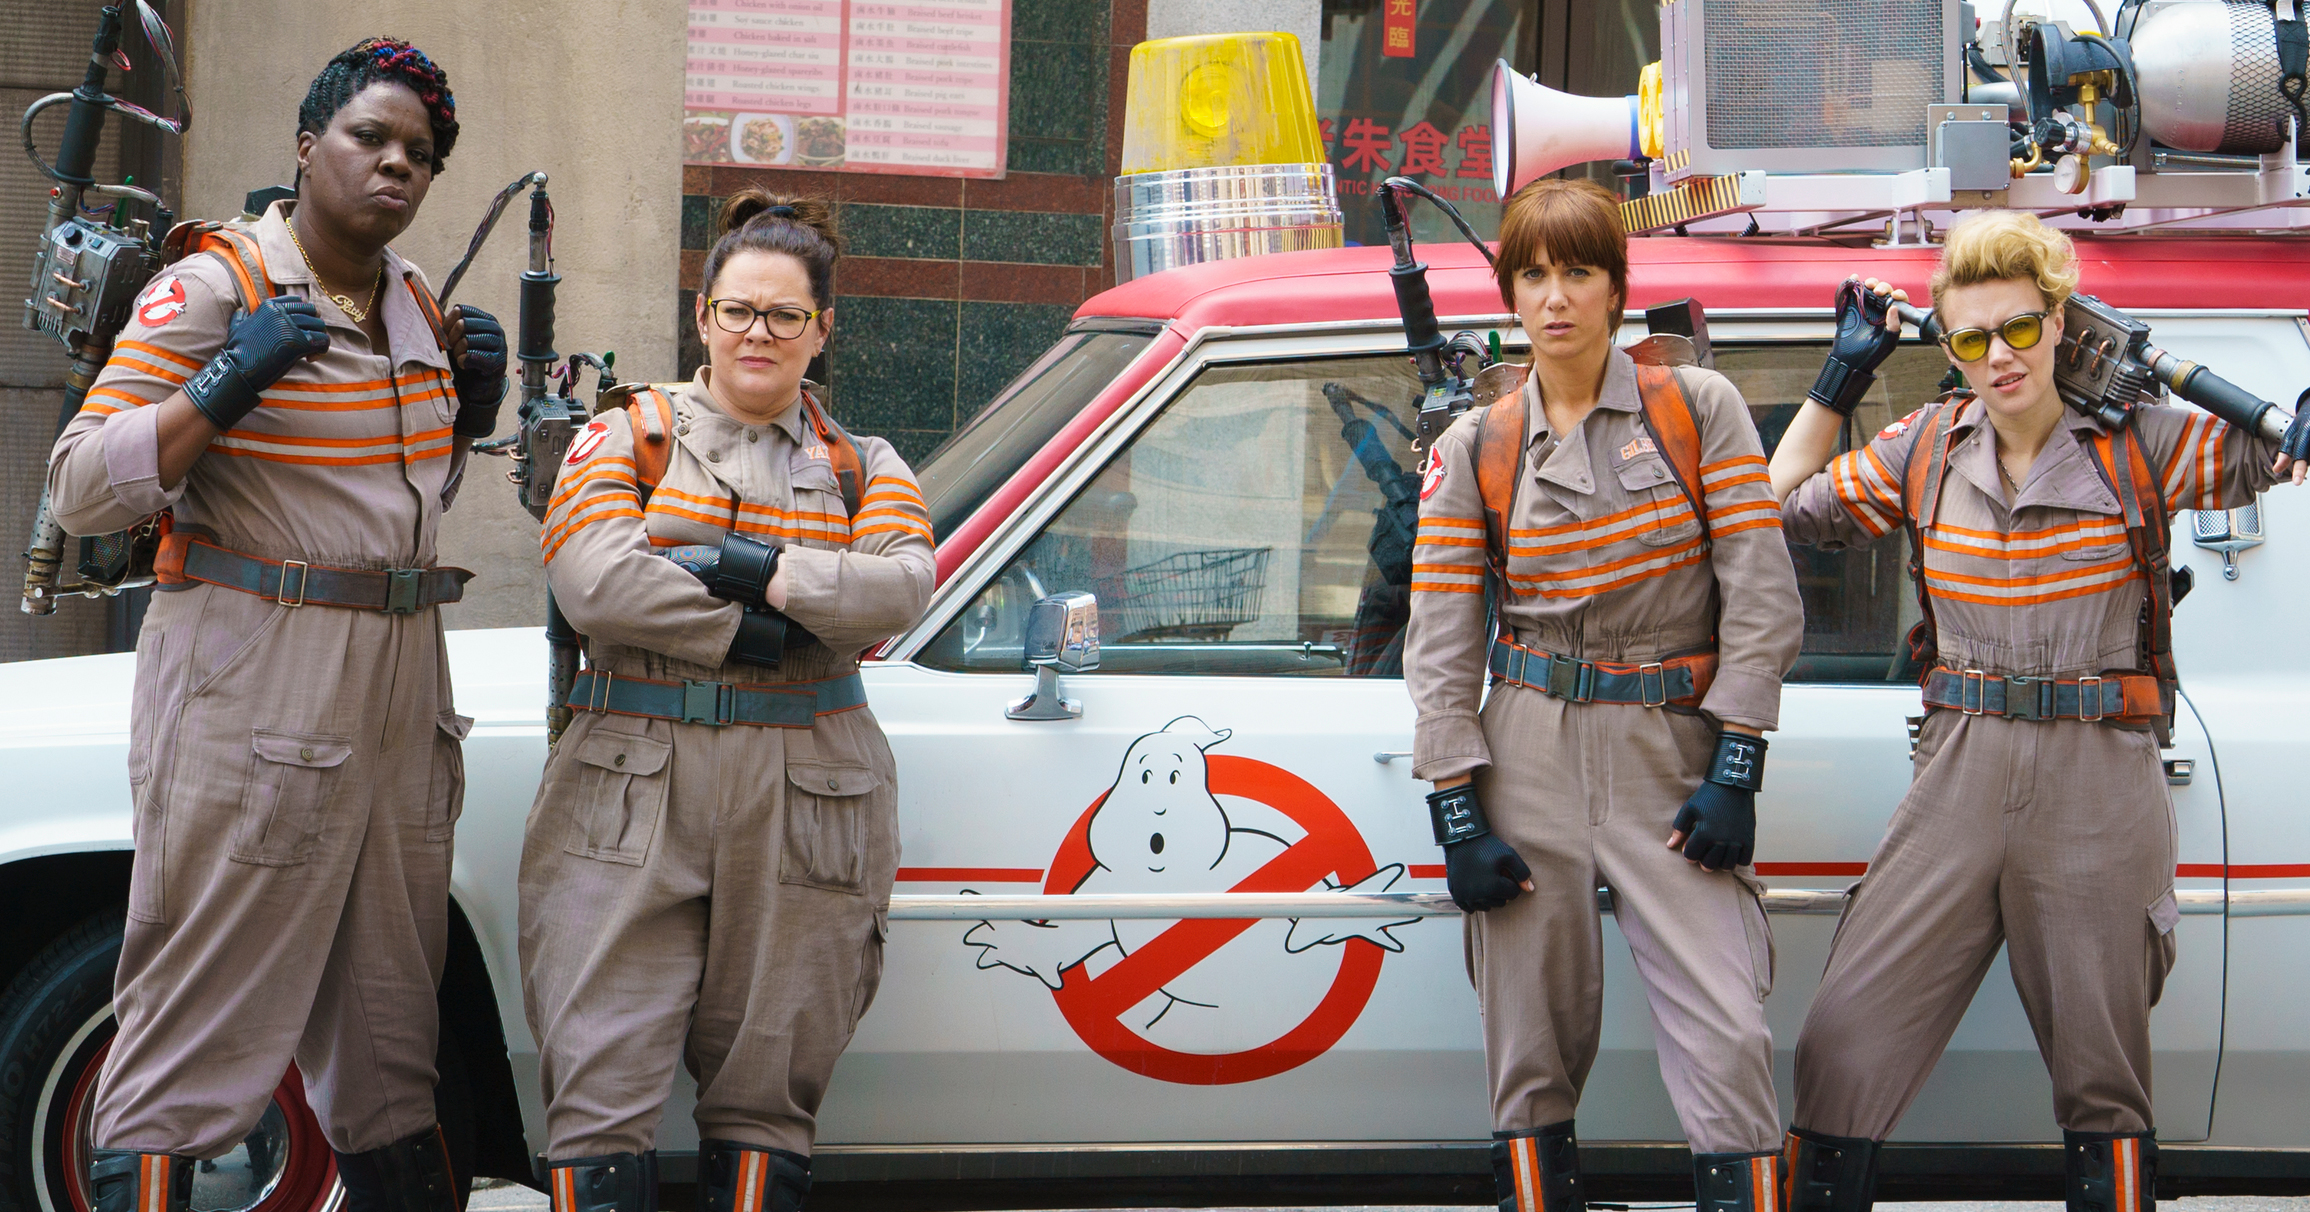 From left: Leslie Jones, Melissa McCarthy, Kristen Wiig and Kate McKinnon in <i>Ghostbusters</i>. (Hopper Stone—Sony Pictures Entertainment)